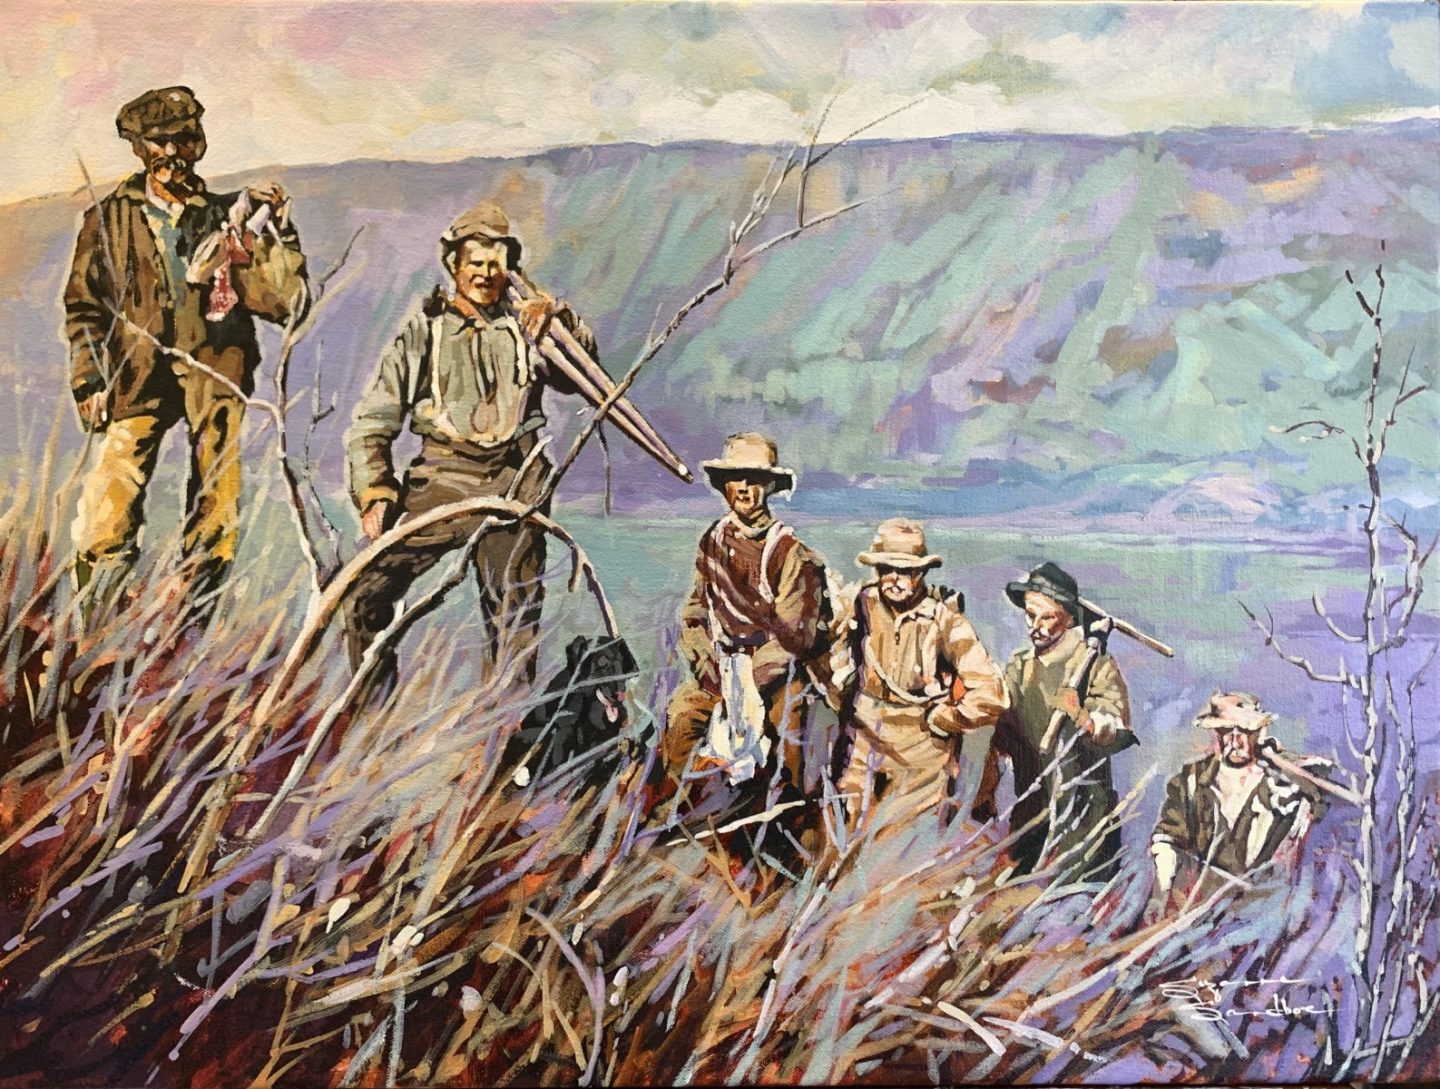 Packing Up From the River Bank - Climbing the Smoky, 18x24, Acrylic, 2021, Suzanne Sandboe - 